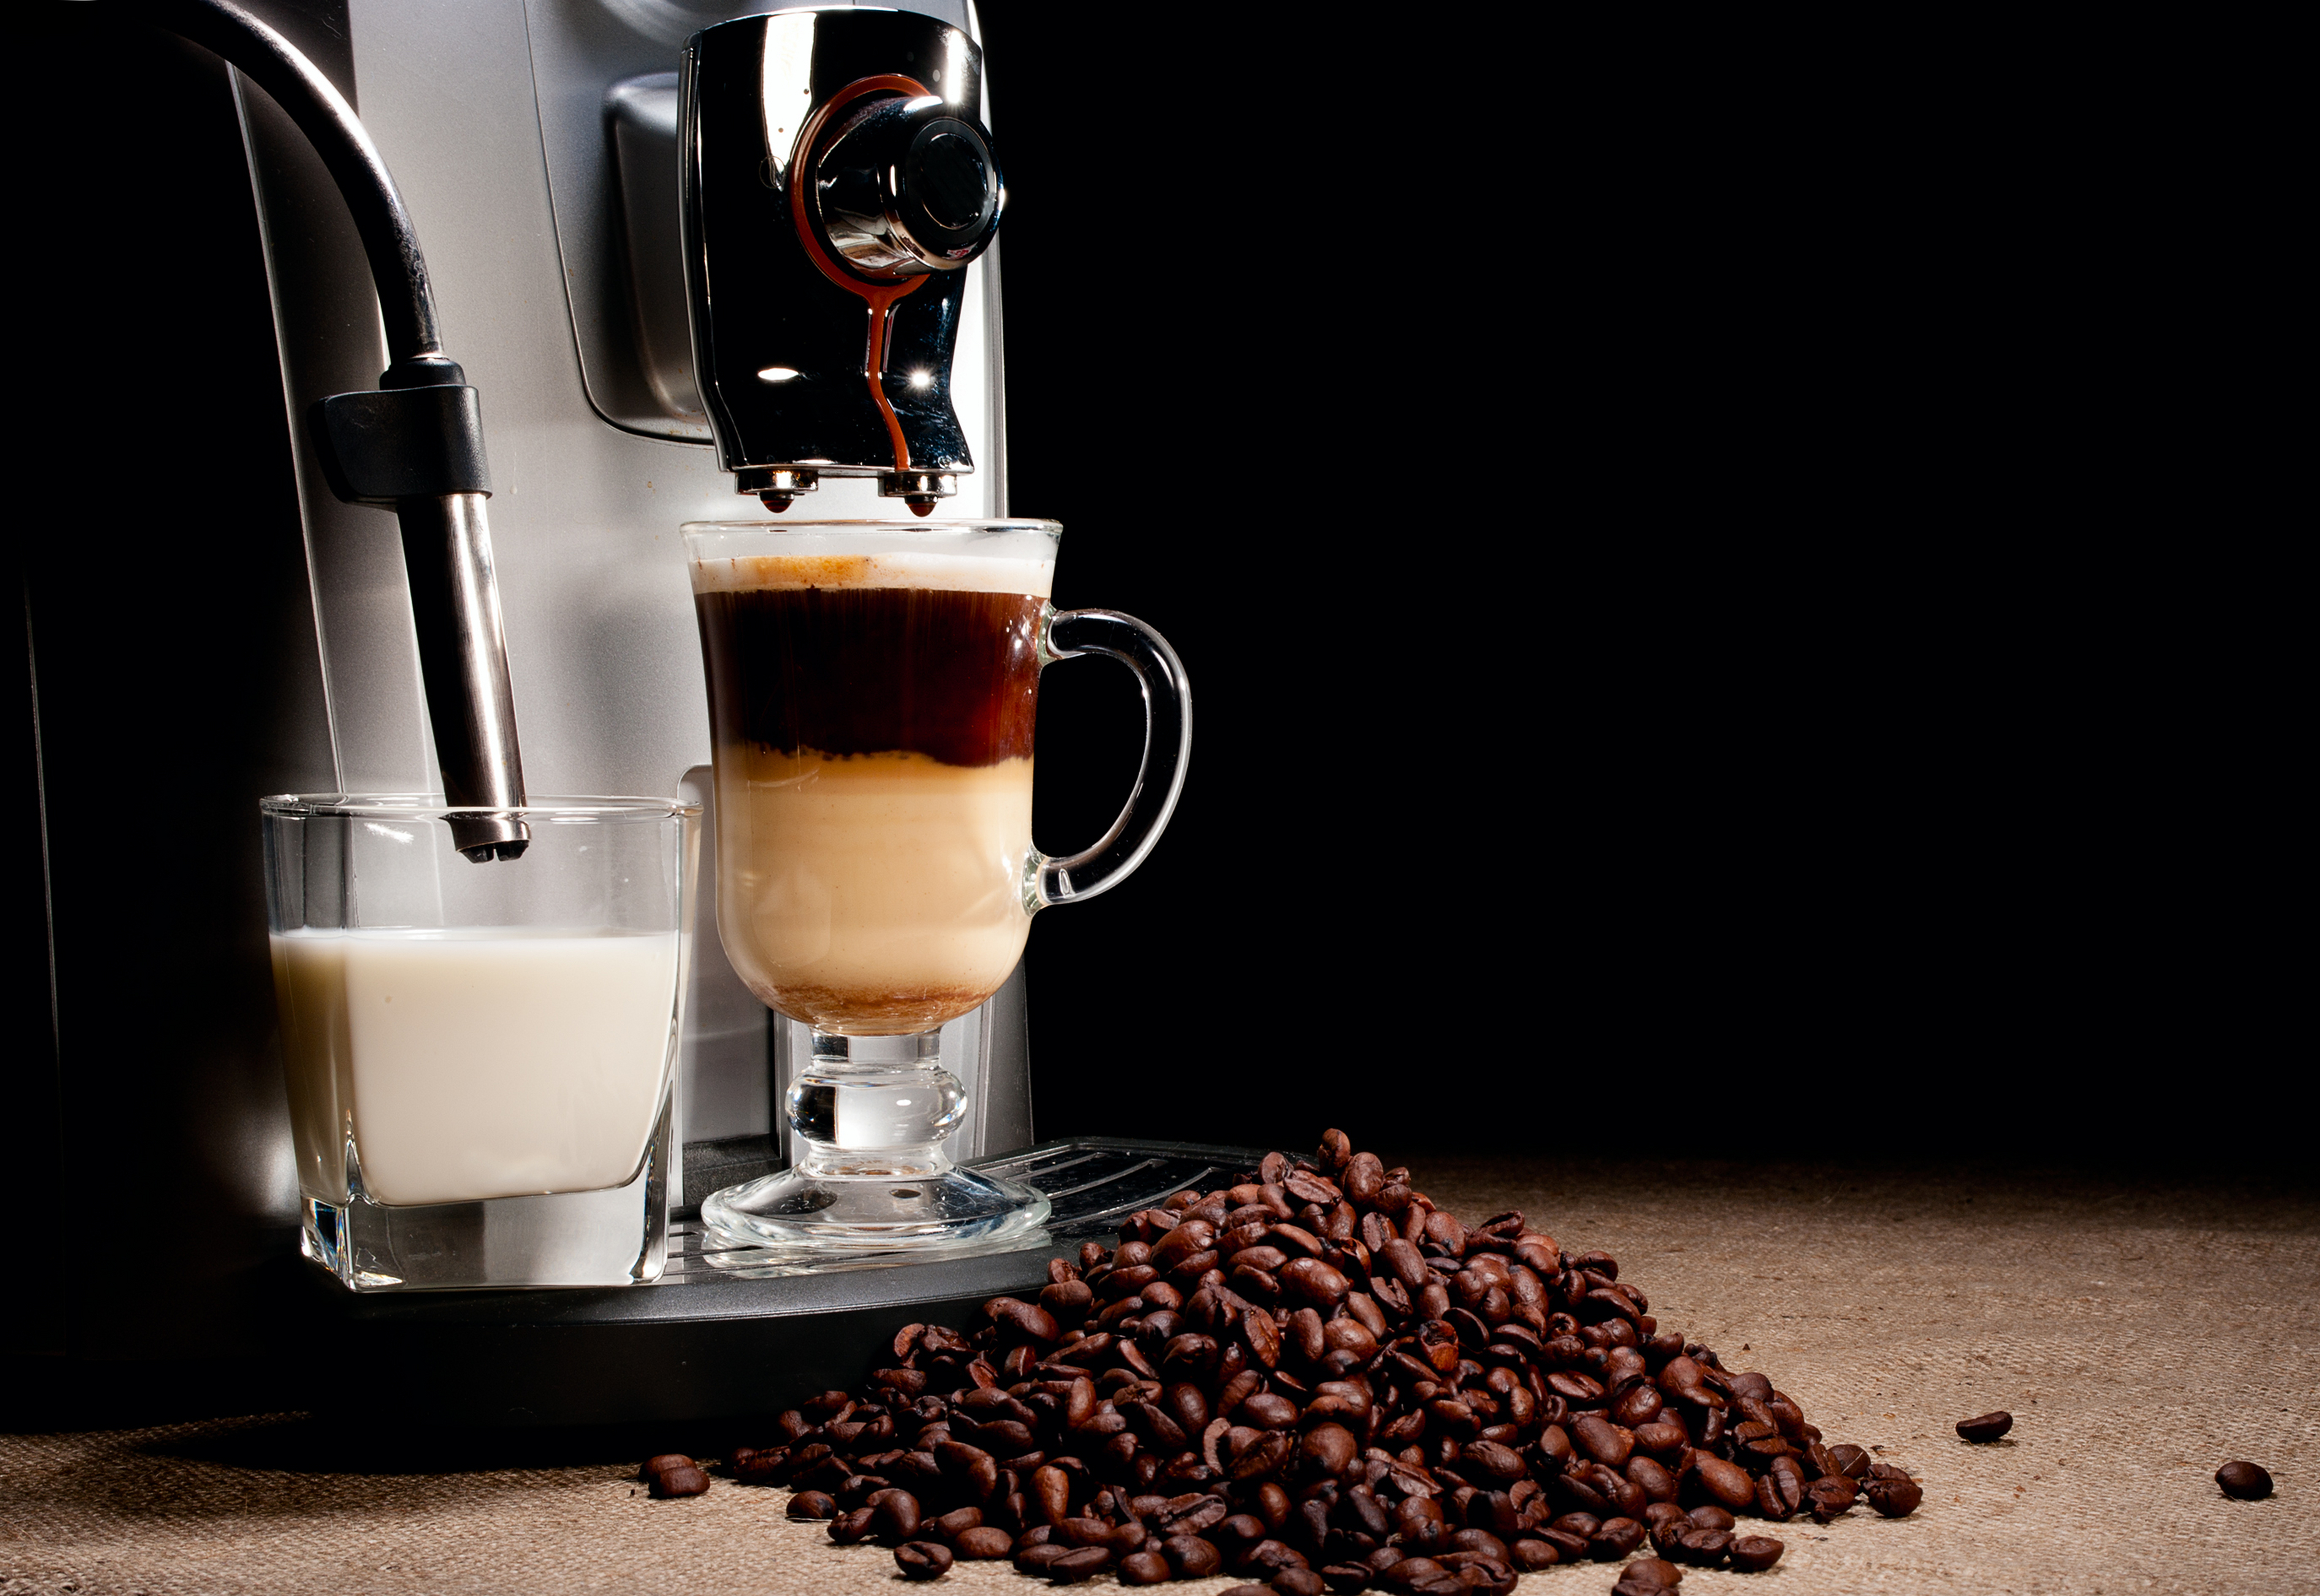 Coffee machine wallpapers and images   wallpapers pictures photos